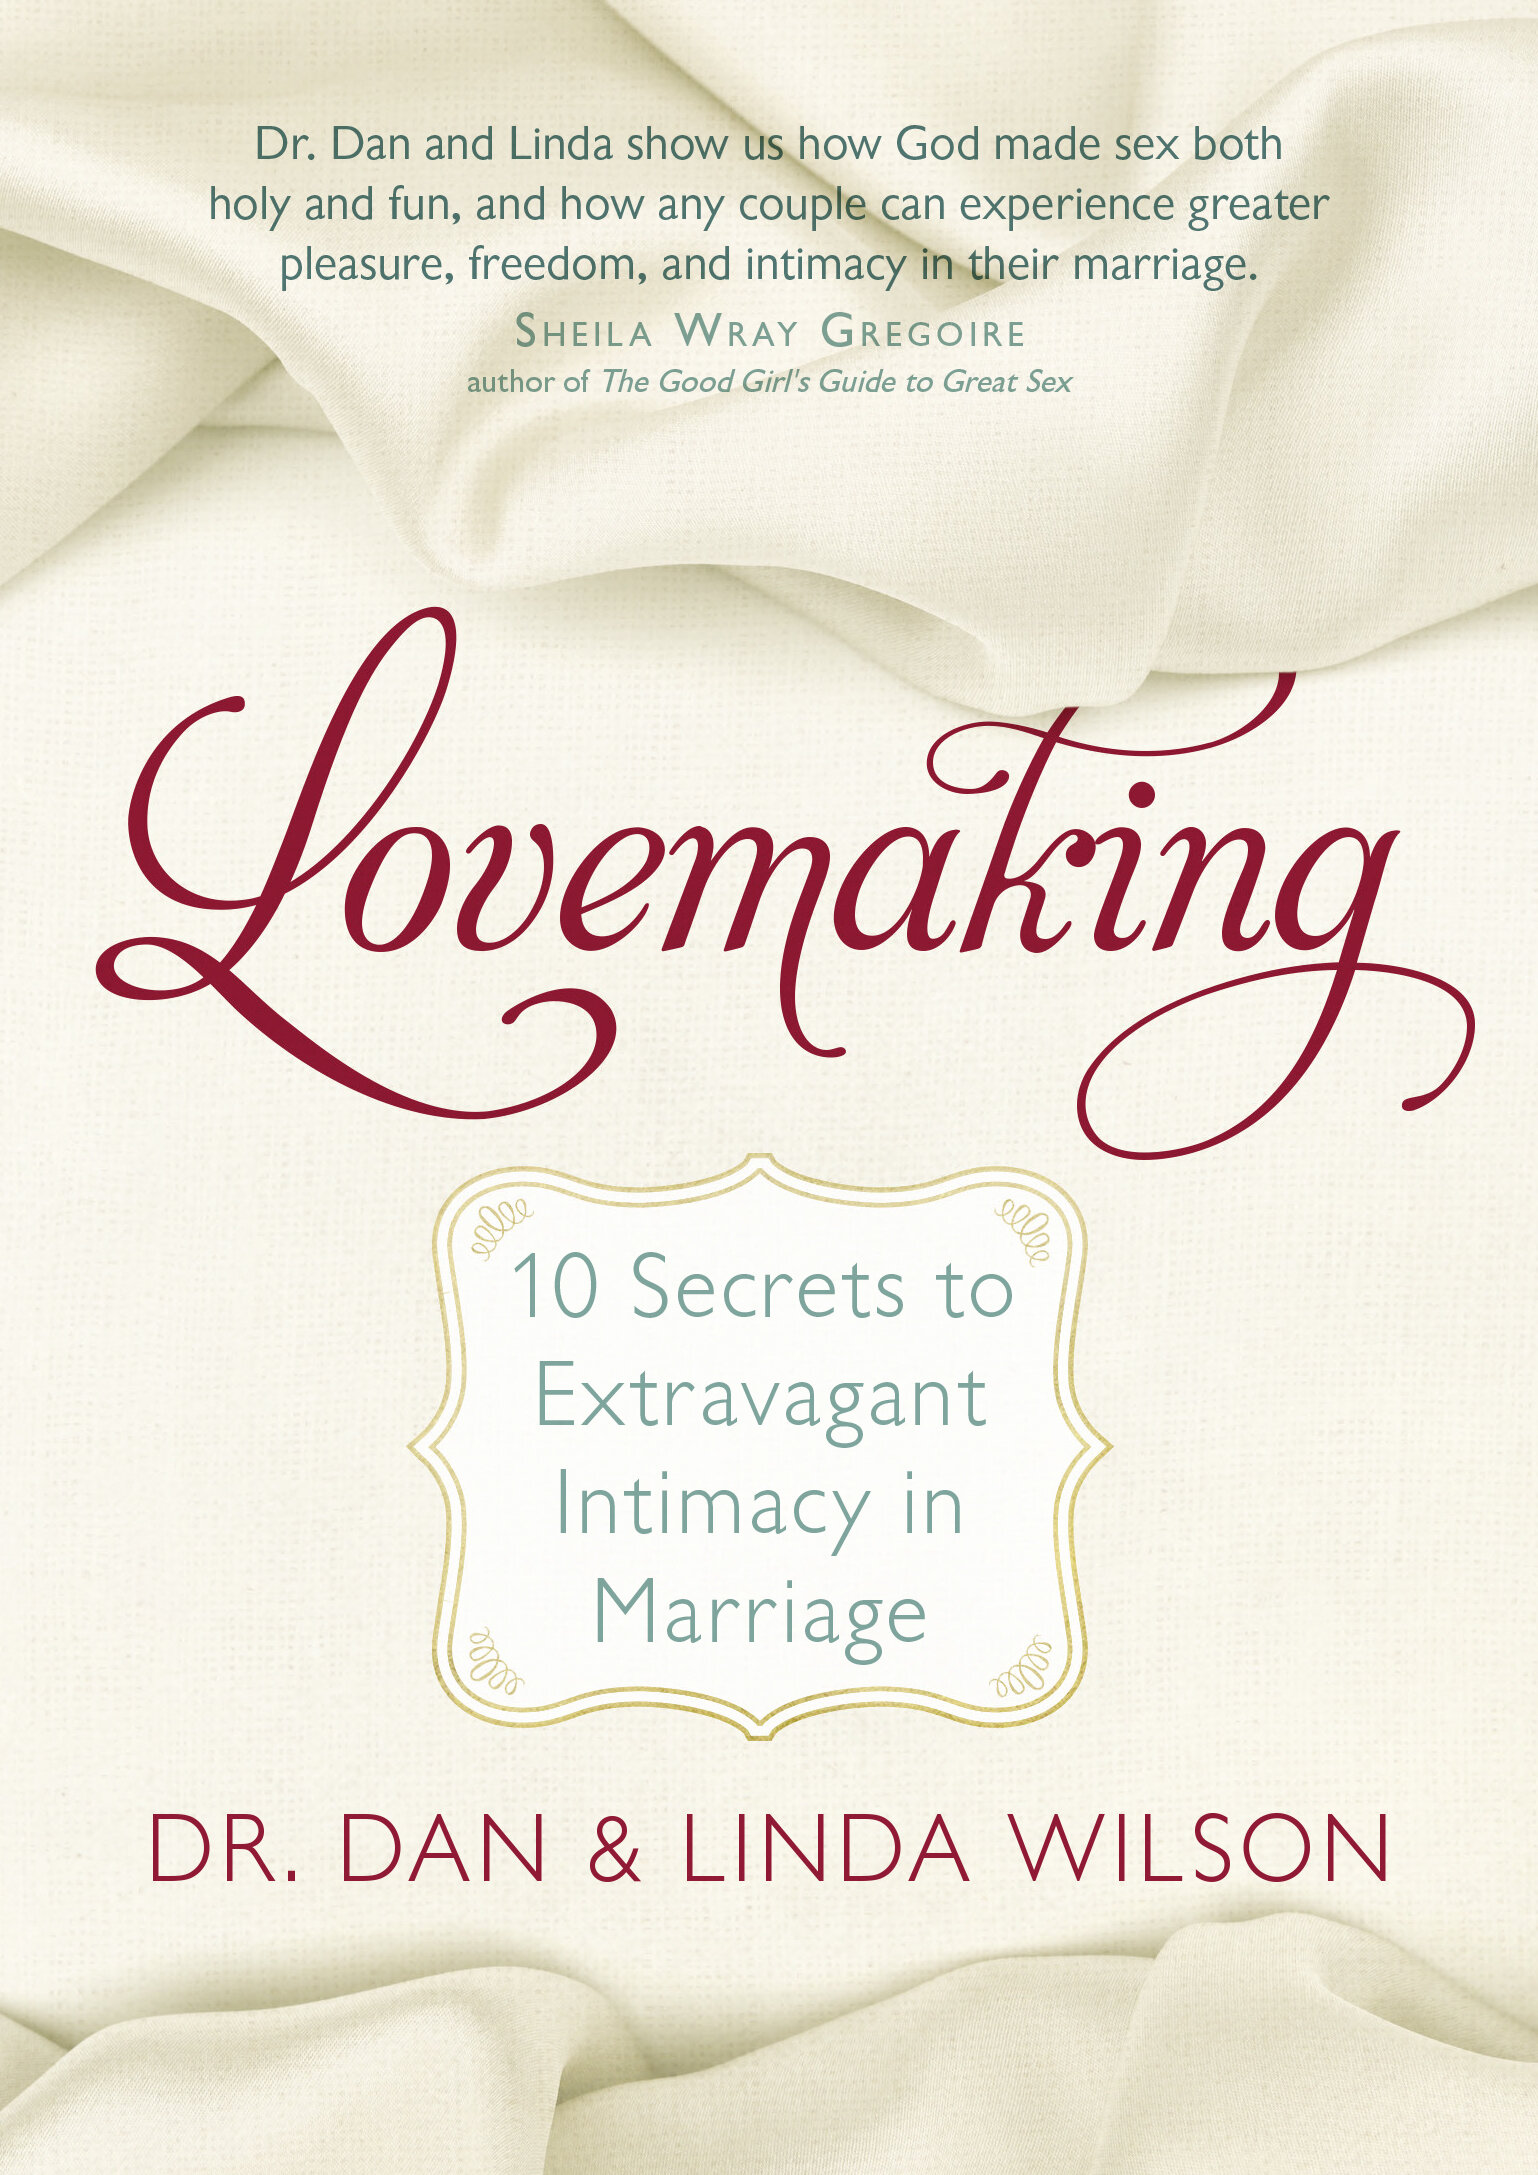 Lovemaking 10 Secrets to Extravagant Intimacy in Marriage Logos Bible Software image